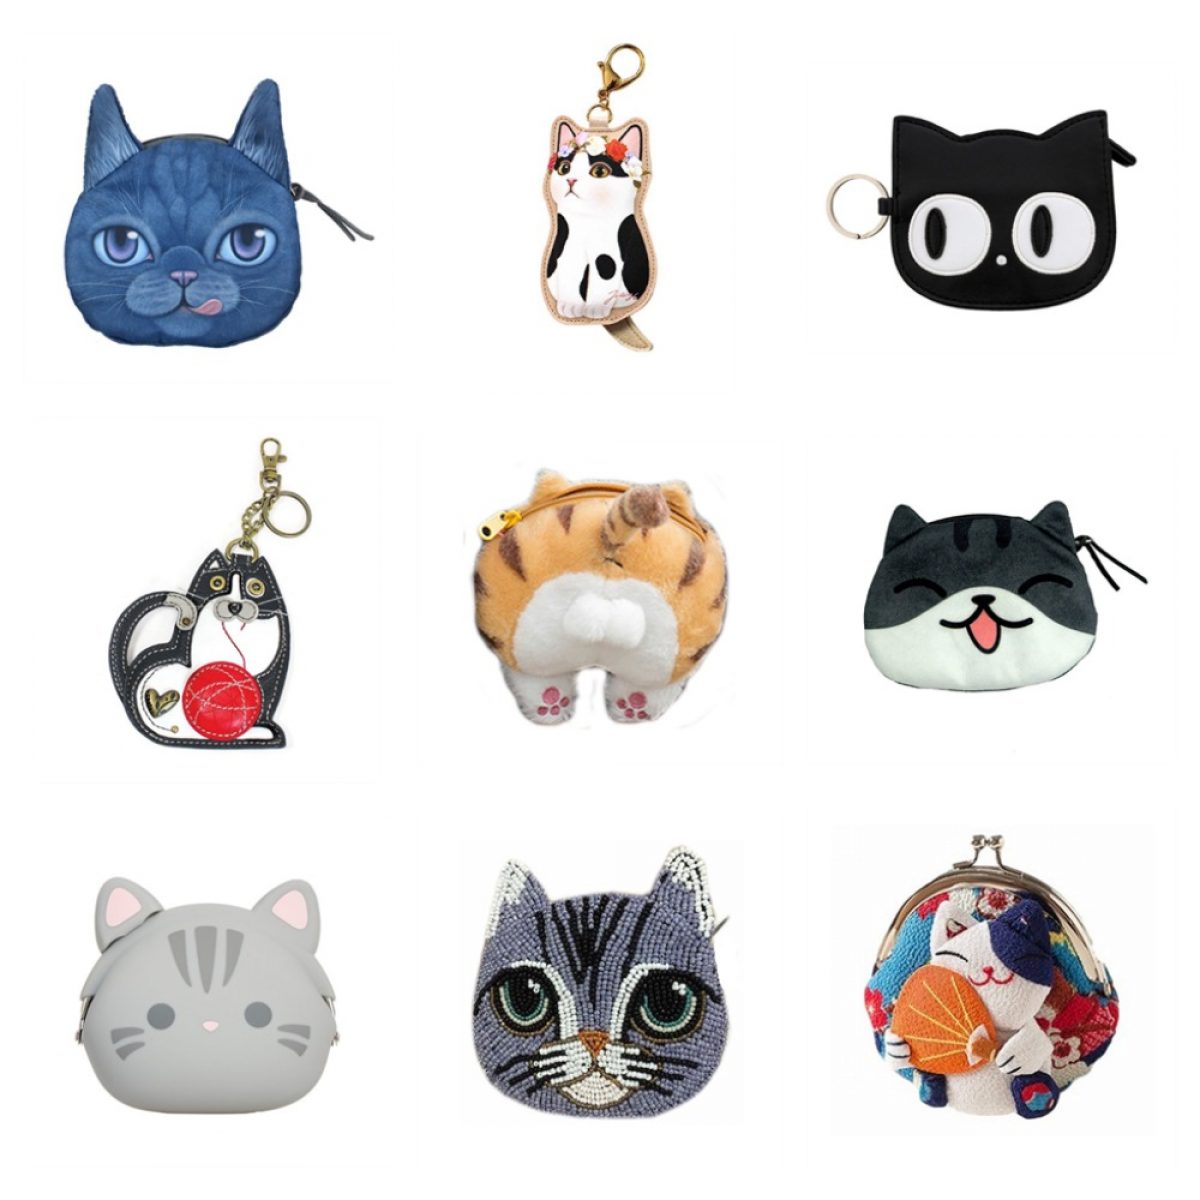 Adorable Cat Change Purse Cell Phone Accessory Best friend Gift For Her